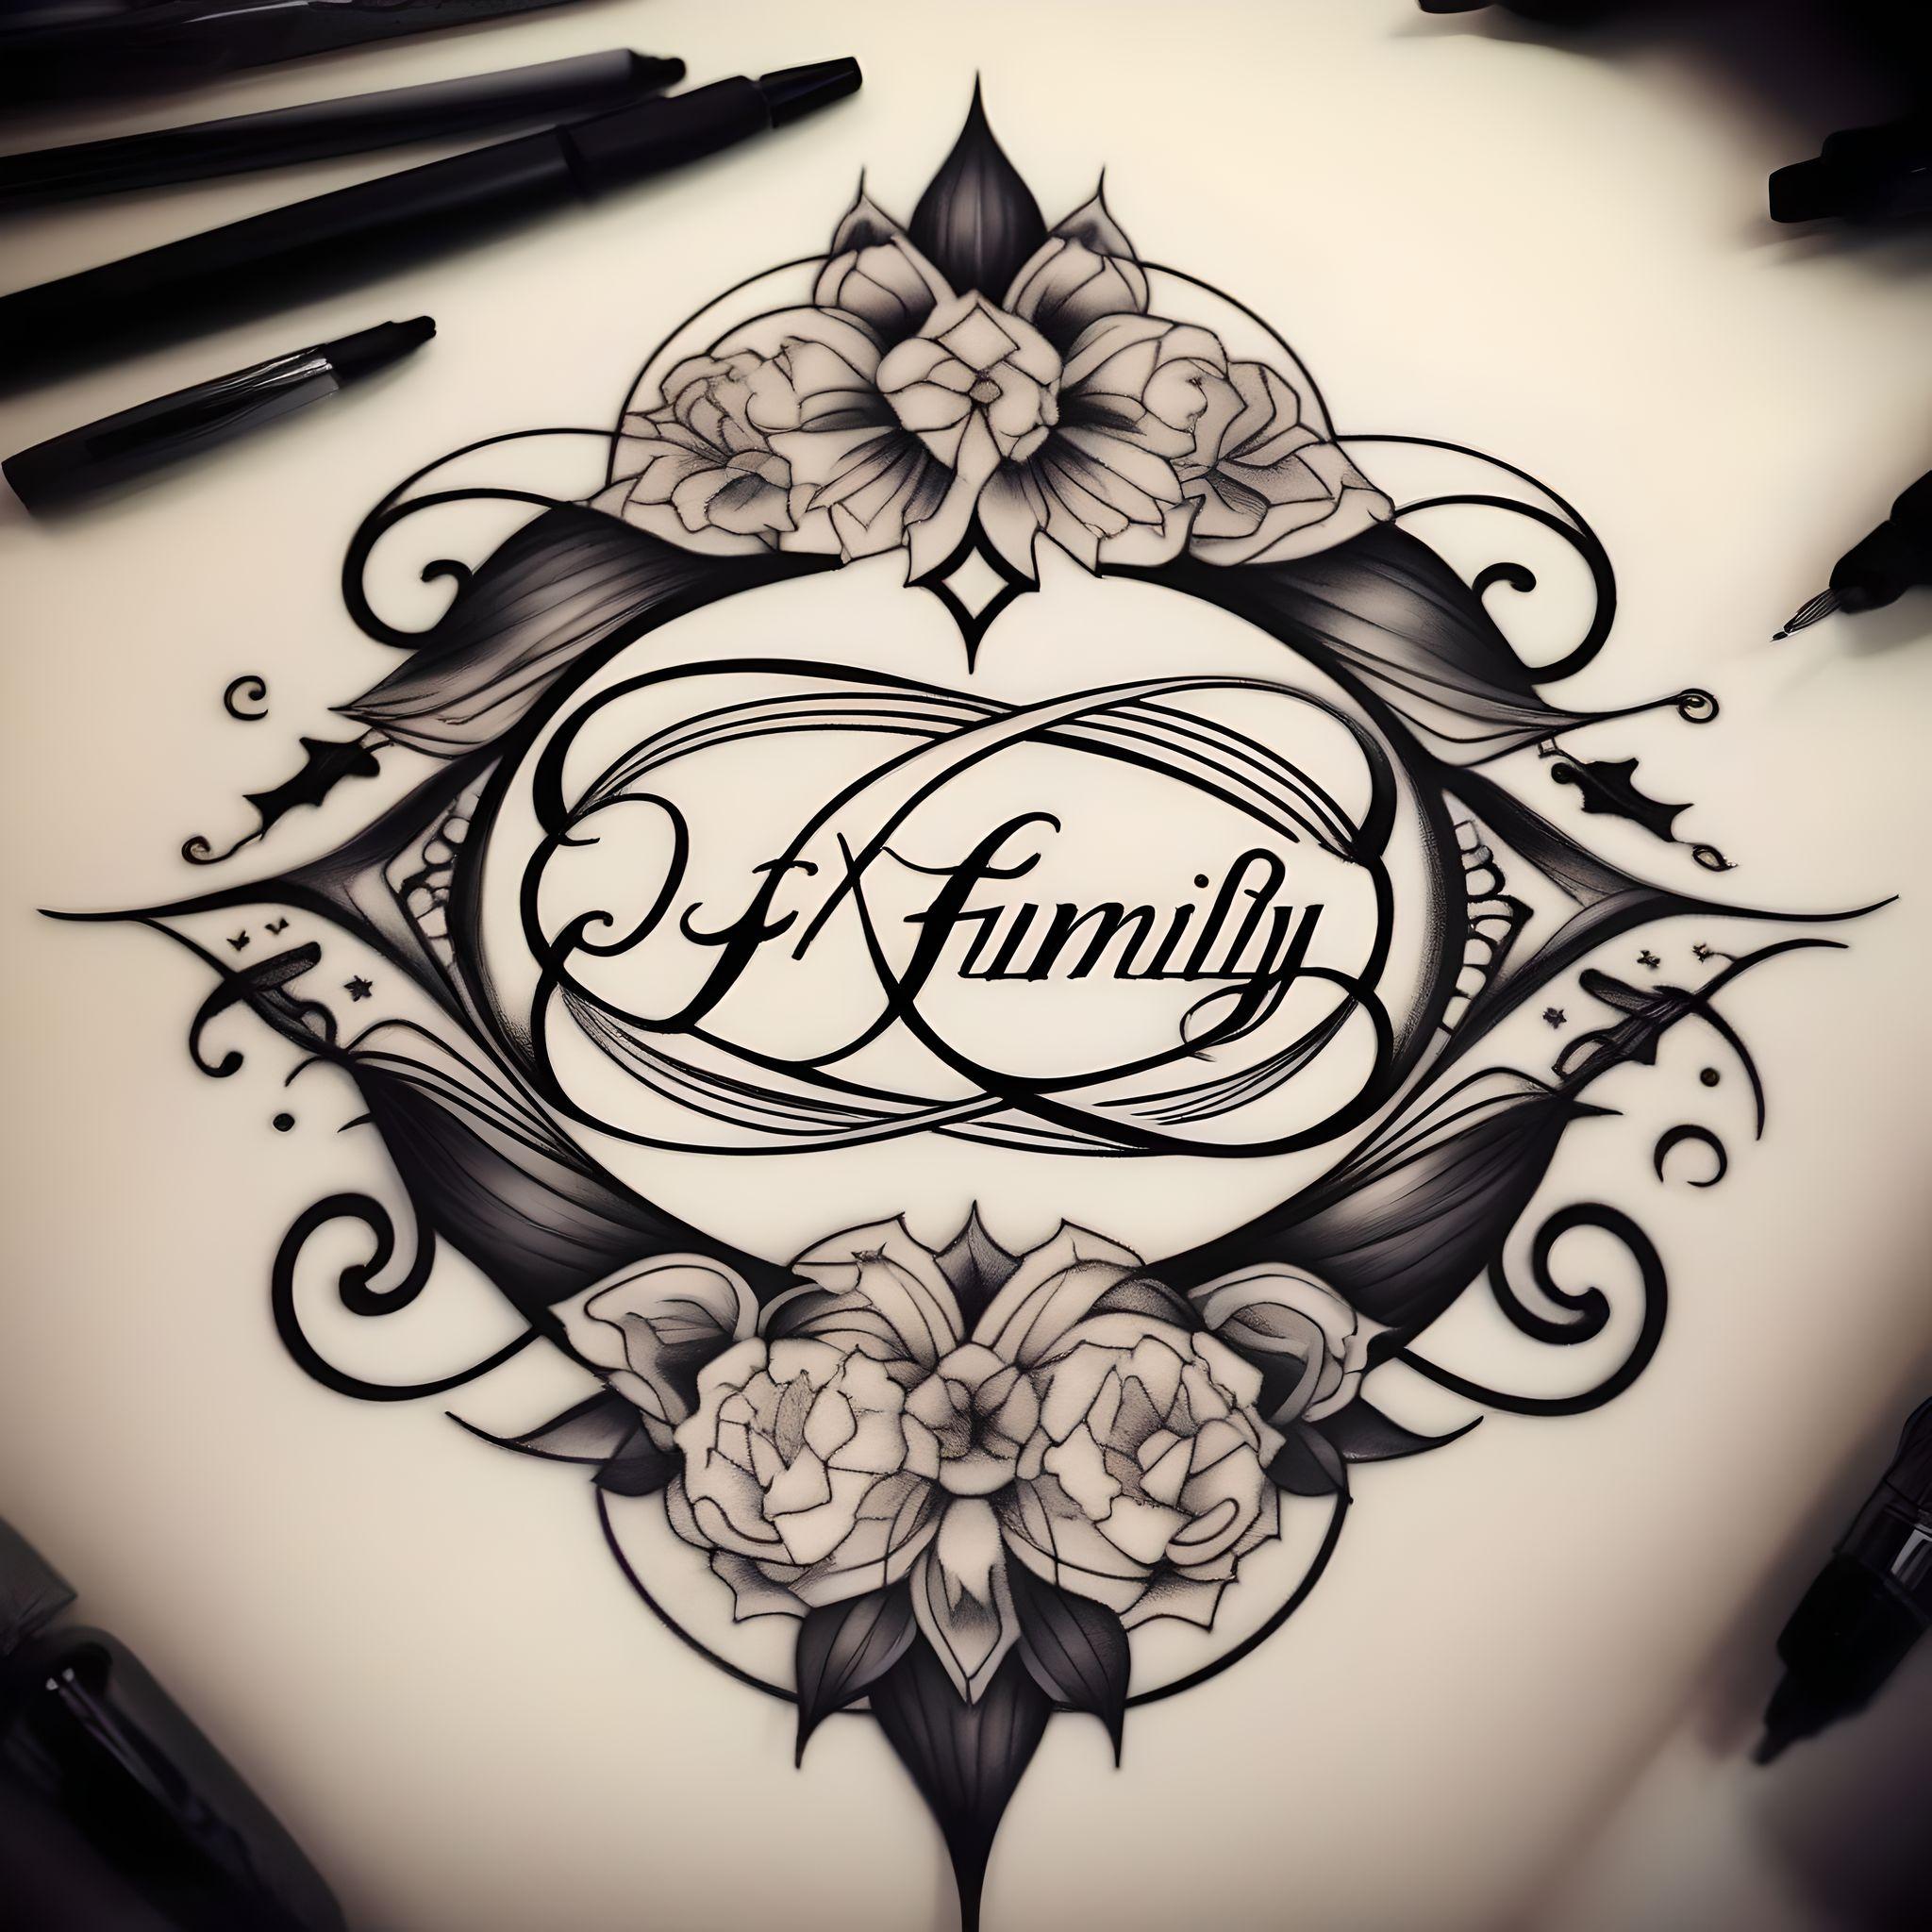 Family Date Tattoo Design by BJGoodwin on DeviantArt